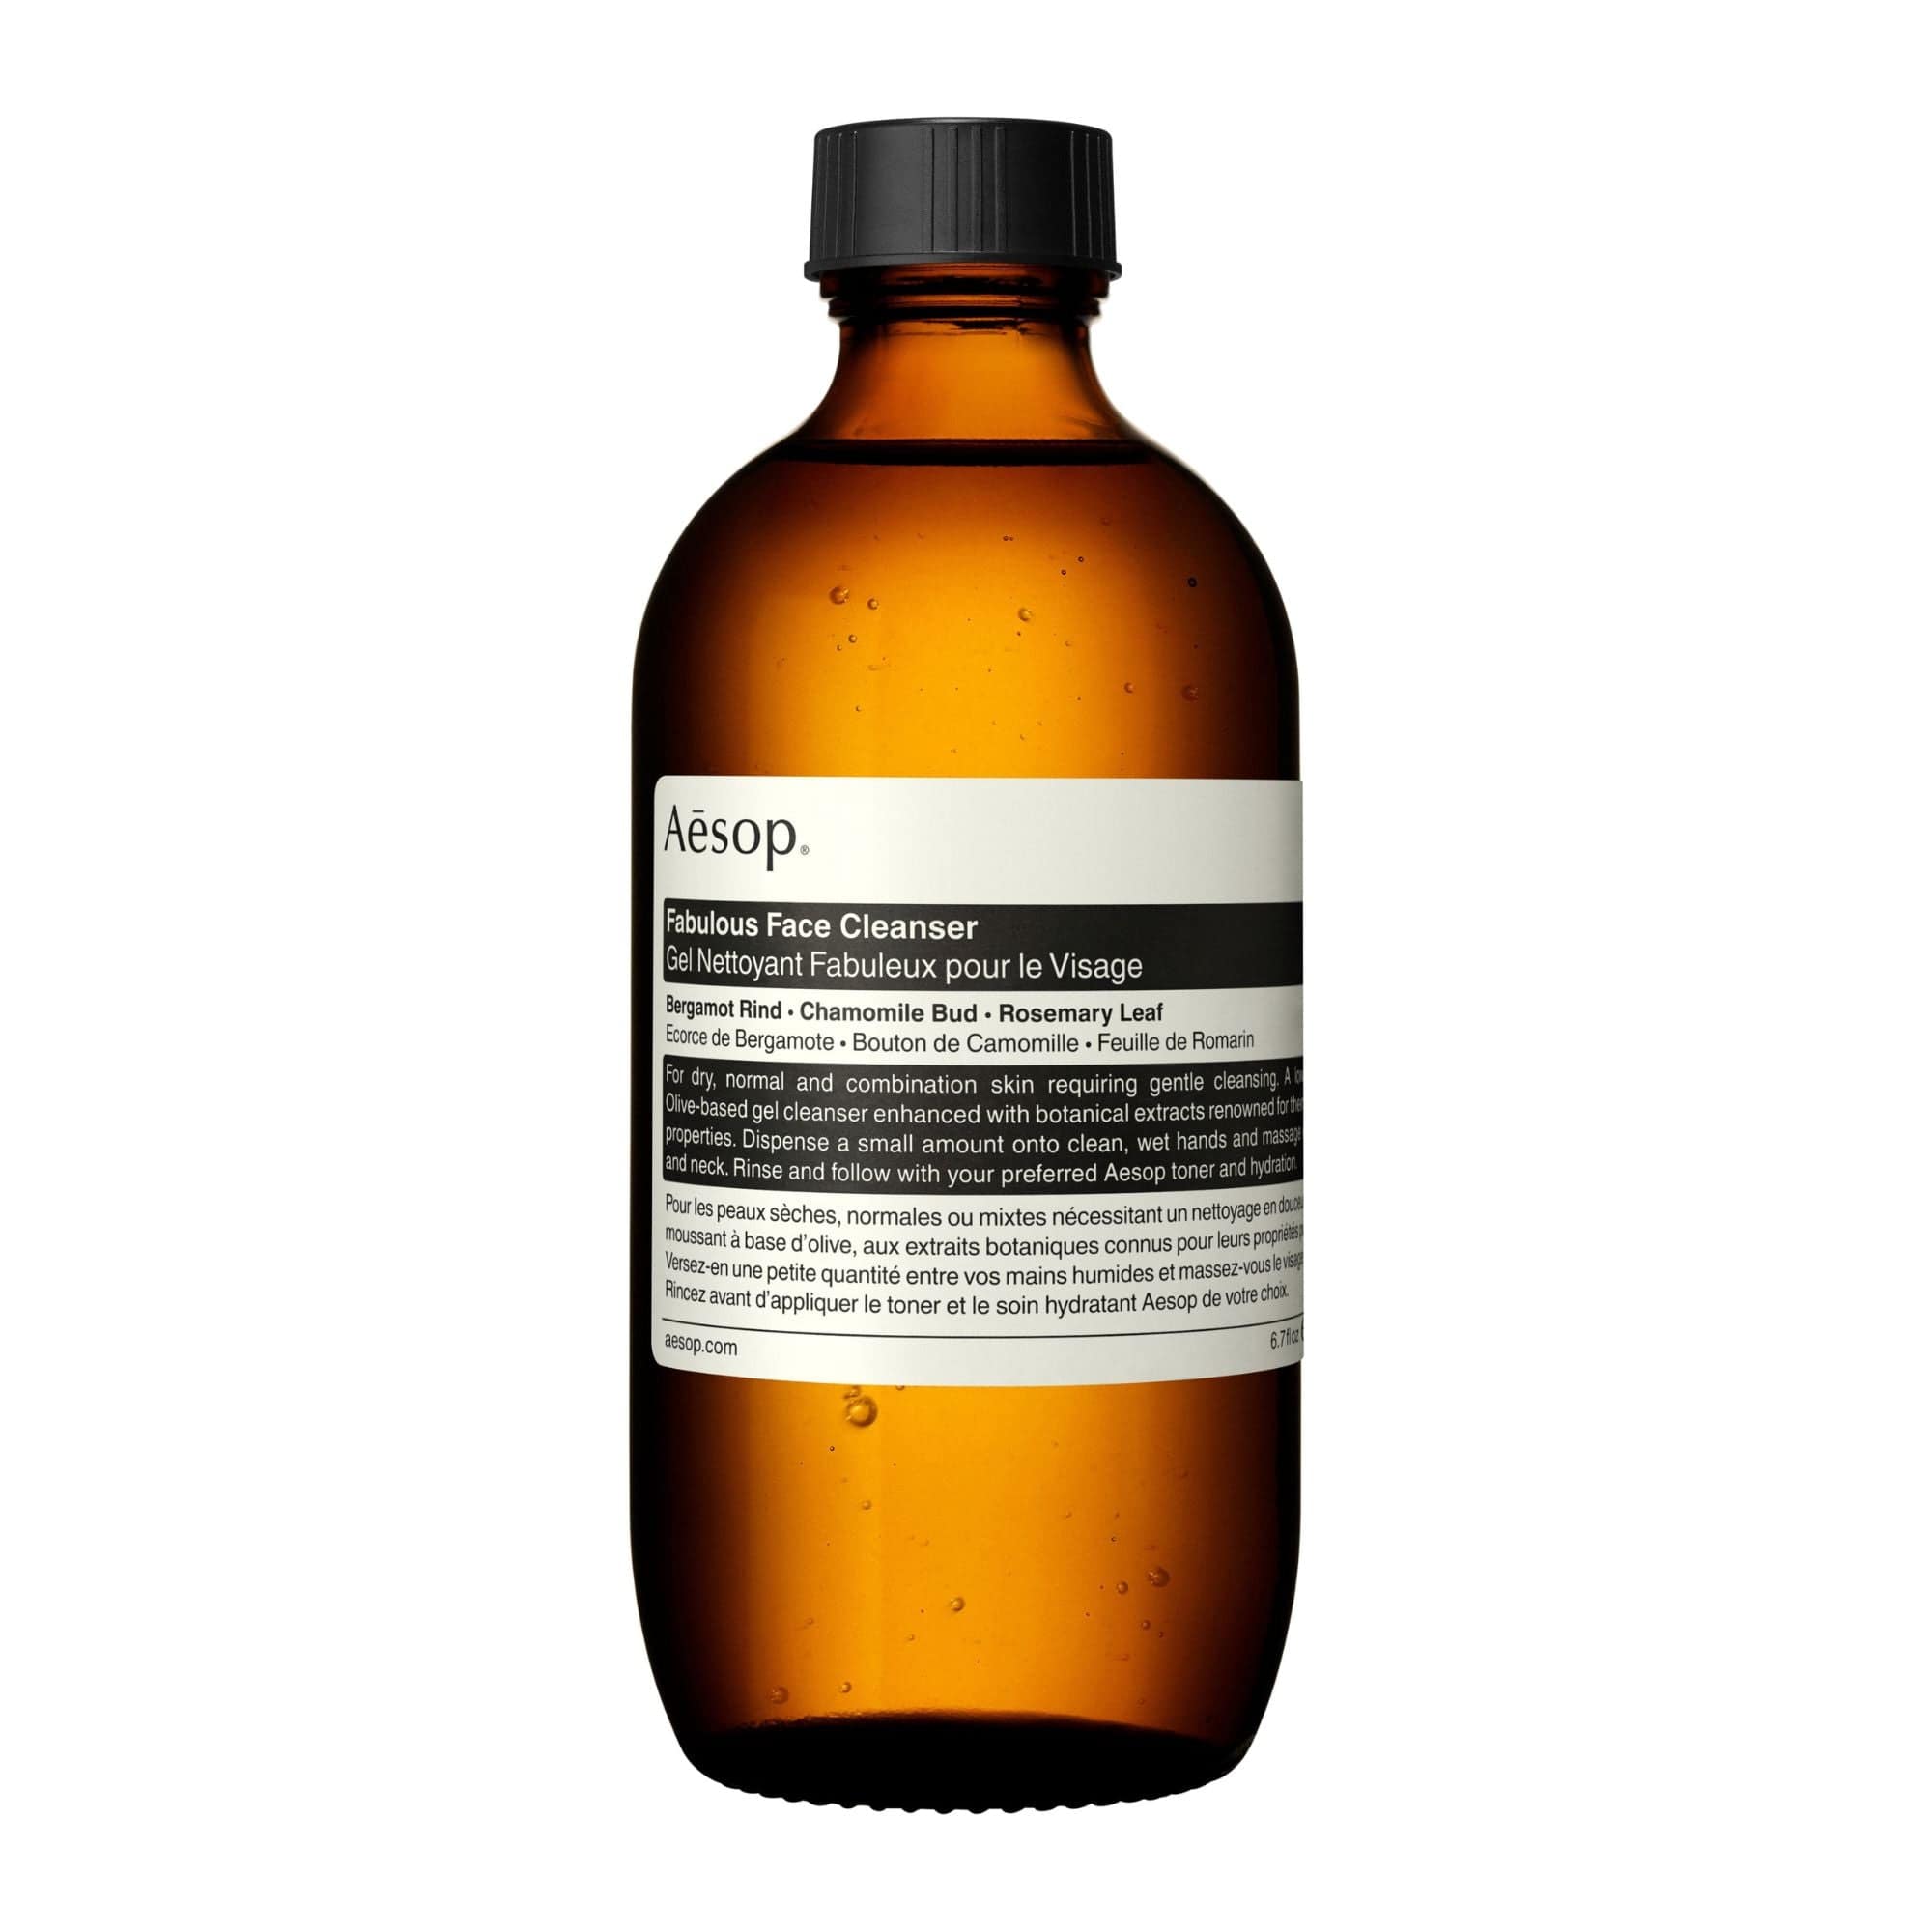 Fabulous Face Cleanser Aesop Limpa o rosto